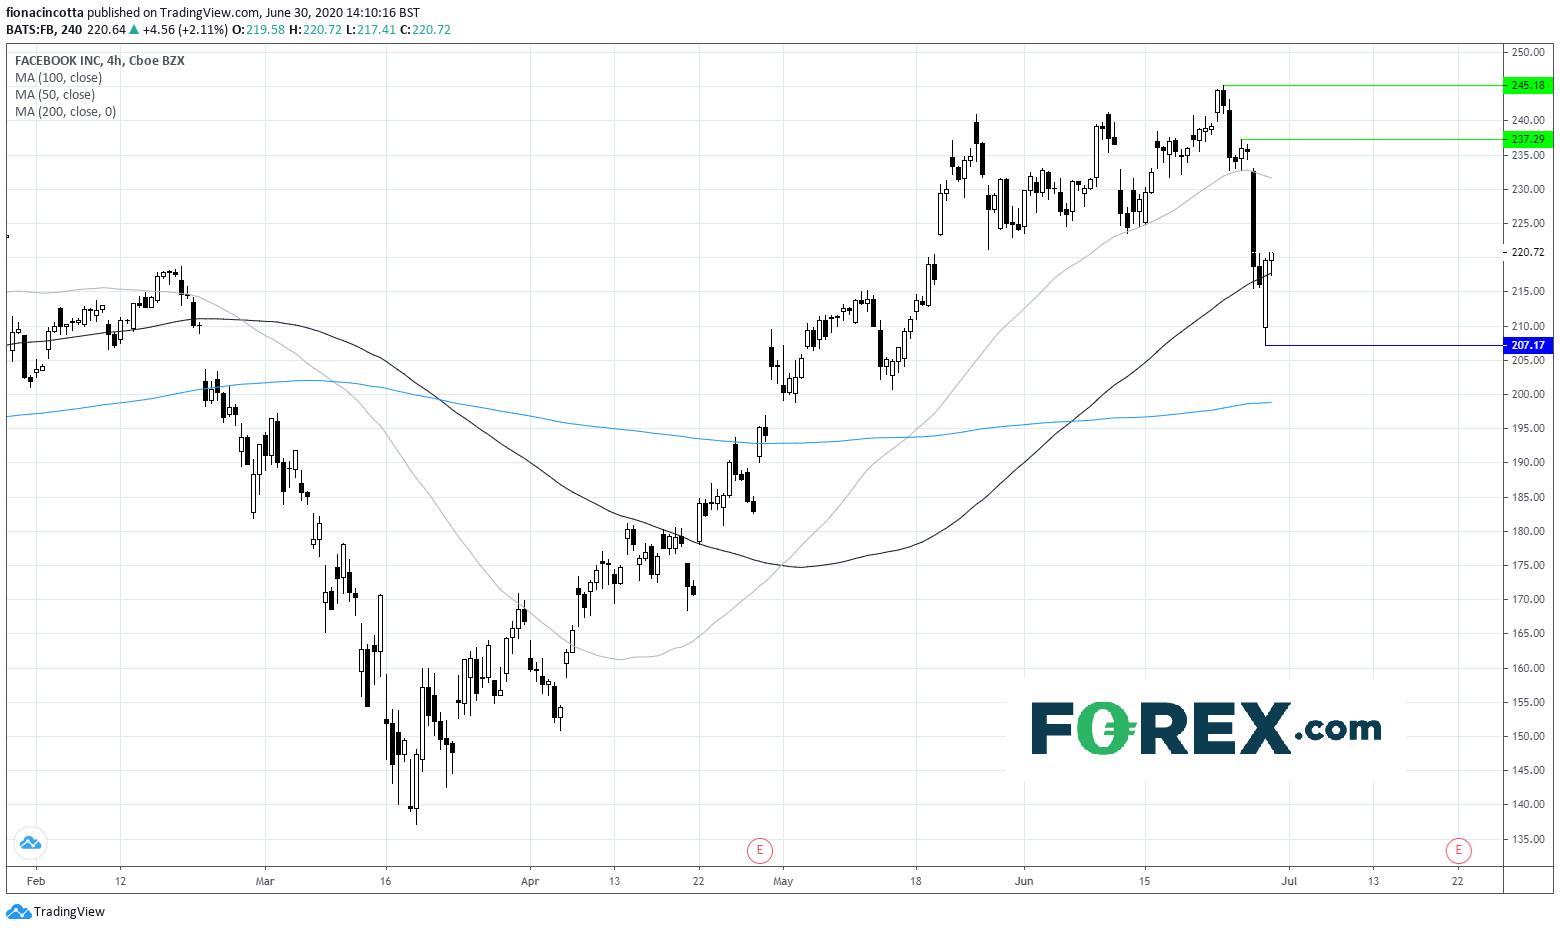 Chart analysis of Facebook's performance - can it recover?. Published in June 2020 by FOREX.com